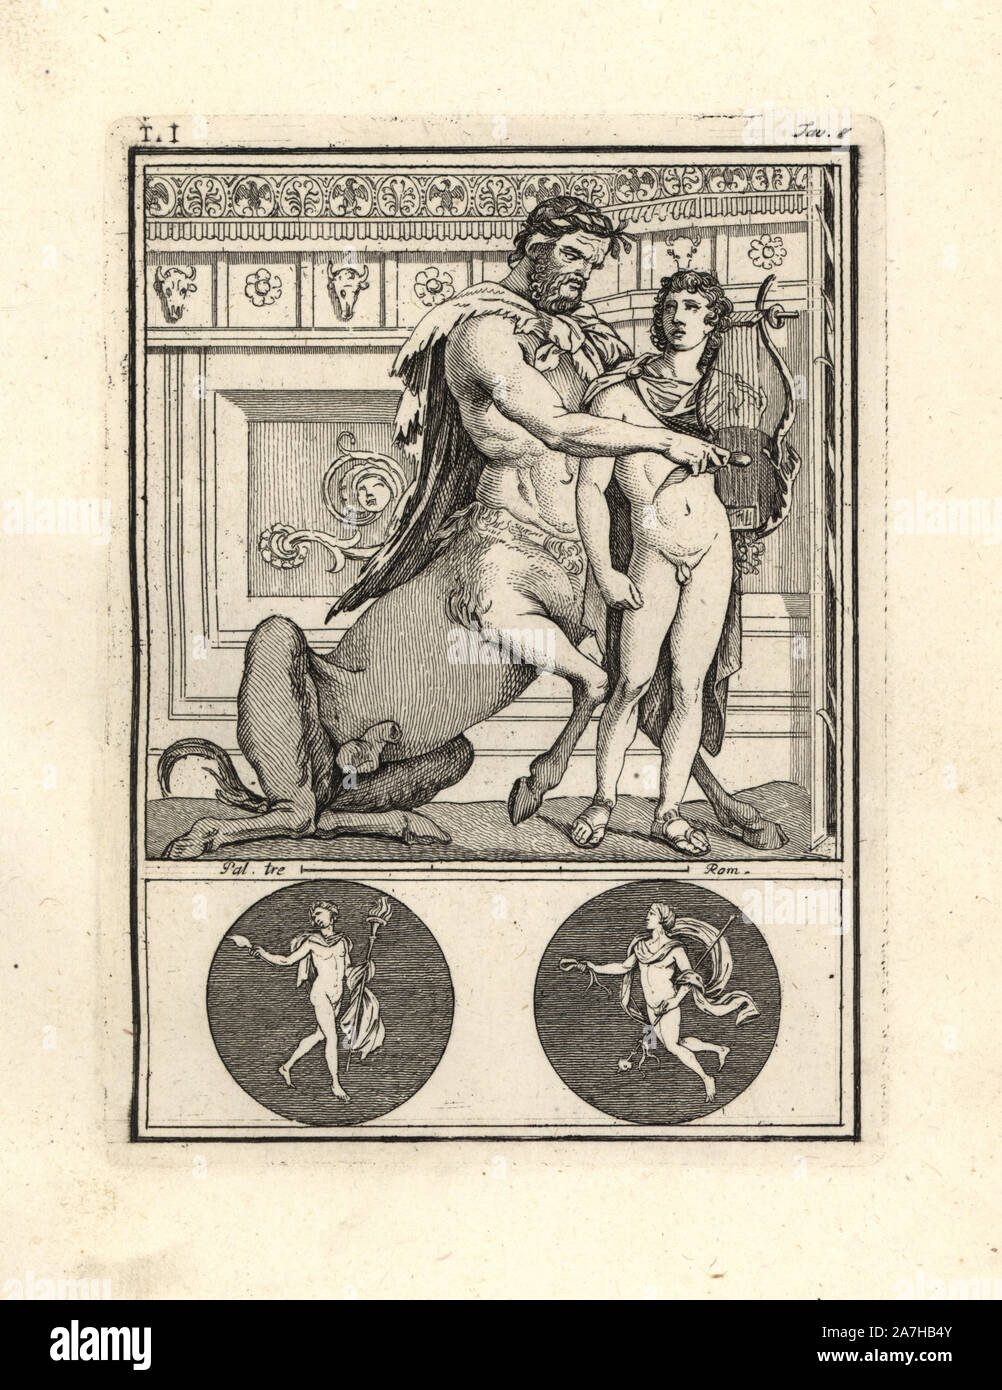 The centaur Chiron, wearing an animal skin and a wreath of flowers (Centaurus?), teaching the boy Achilles to play the Cetera or lyre. Below are two vignettes of ministers of Bacchus, one with a torch and one with a ribbon and tyrse. Discovered in Resina in 1739. Copperplate engraved by Tommaso Piroli from his own 'Antichita di Ercolano' (Antiquities of Herculaneum), Rome, 1789.  Italian artist and engraver Piroli (1752-1824) published six volumes between 1789 and 1807 documenting the murals and bronzes found in Heraculaneum and Pompeii. Stock Photo